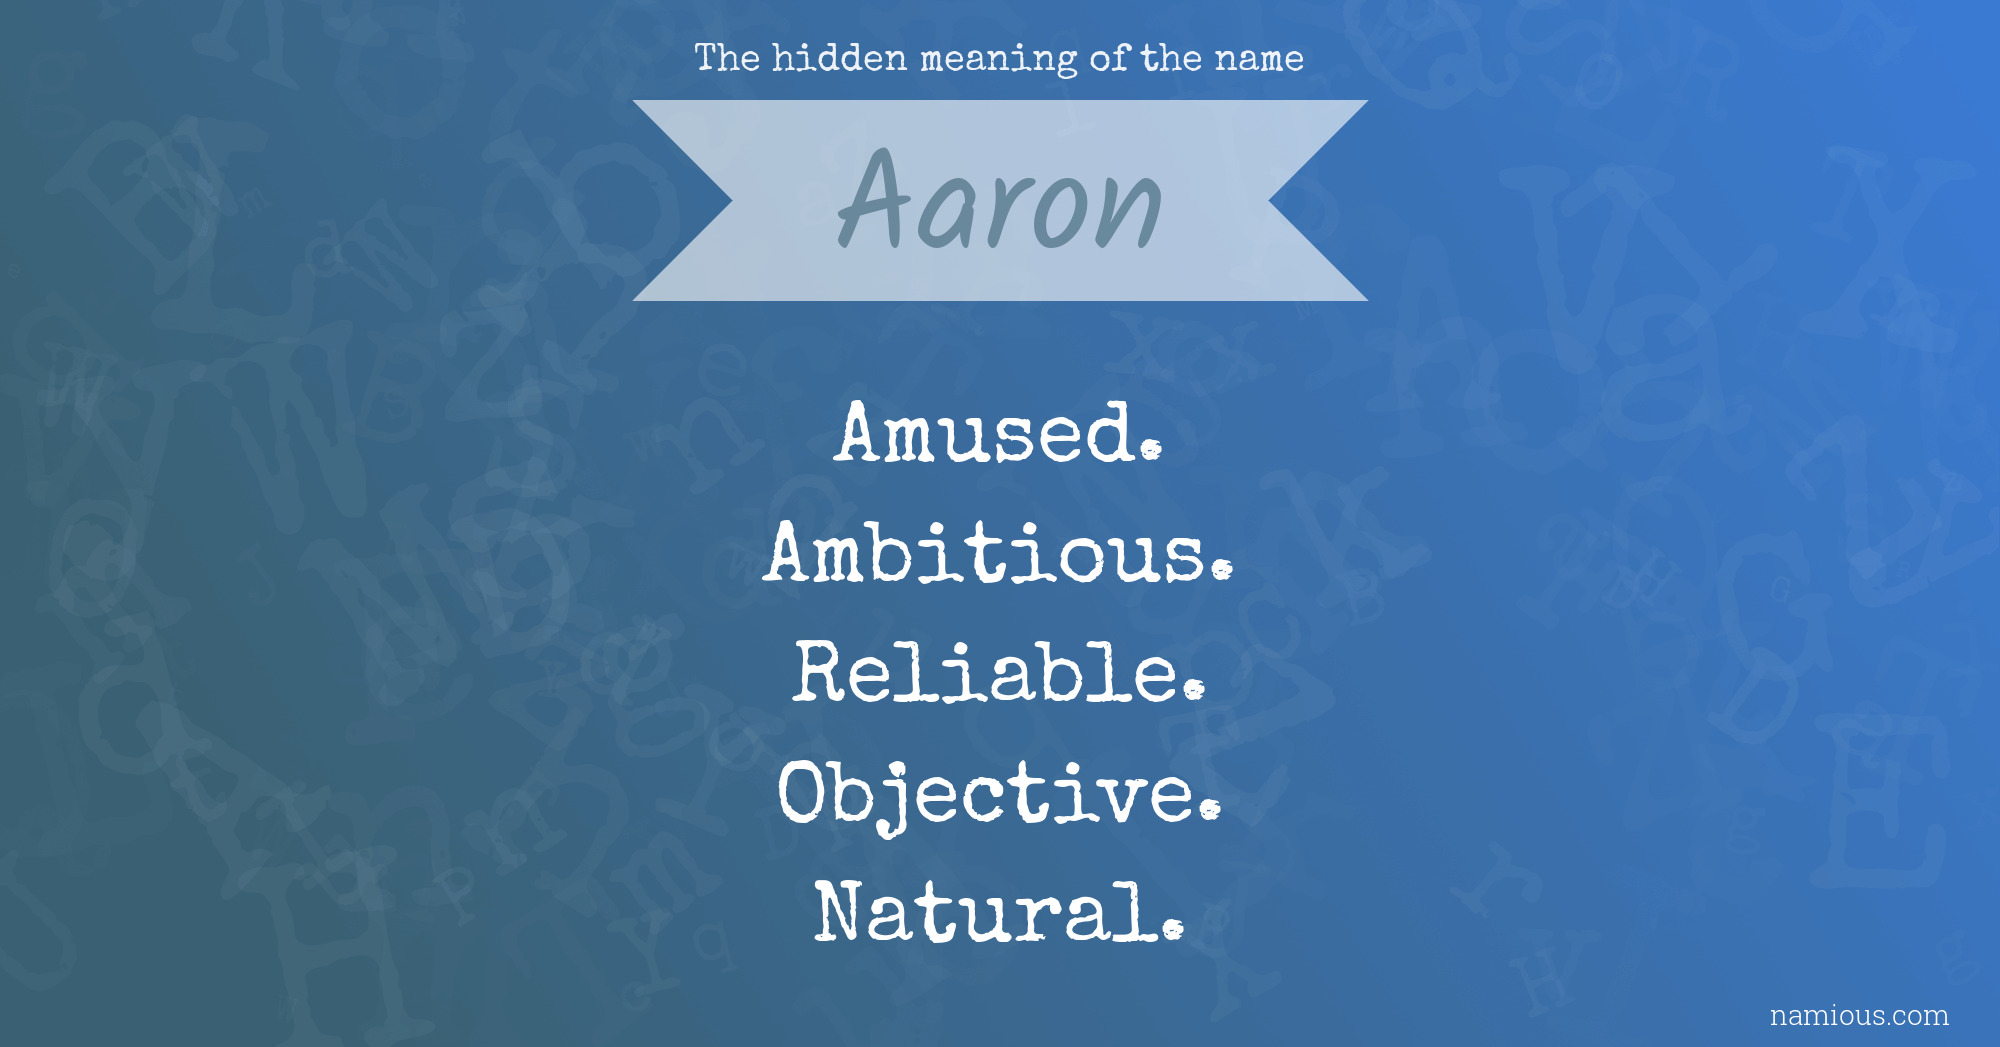 The hidden meaning of the name Aaron